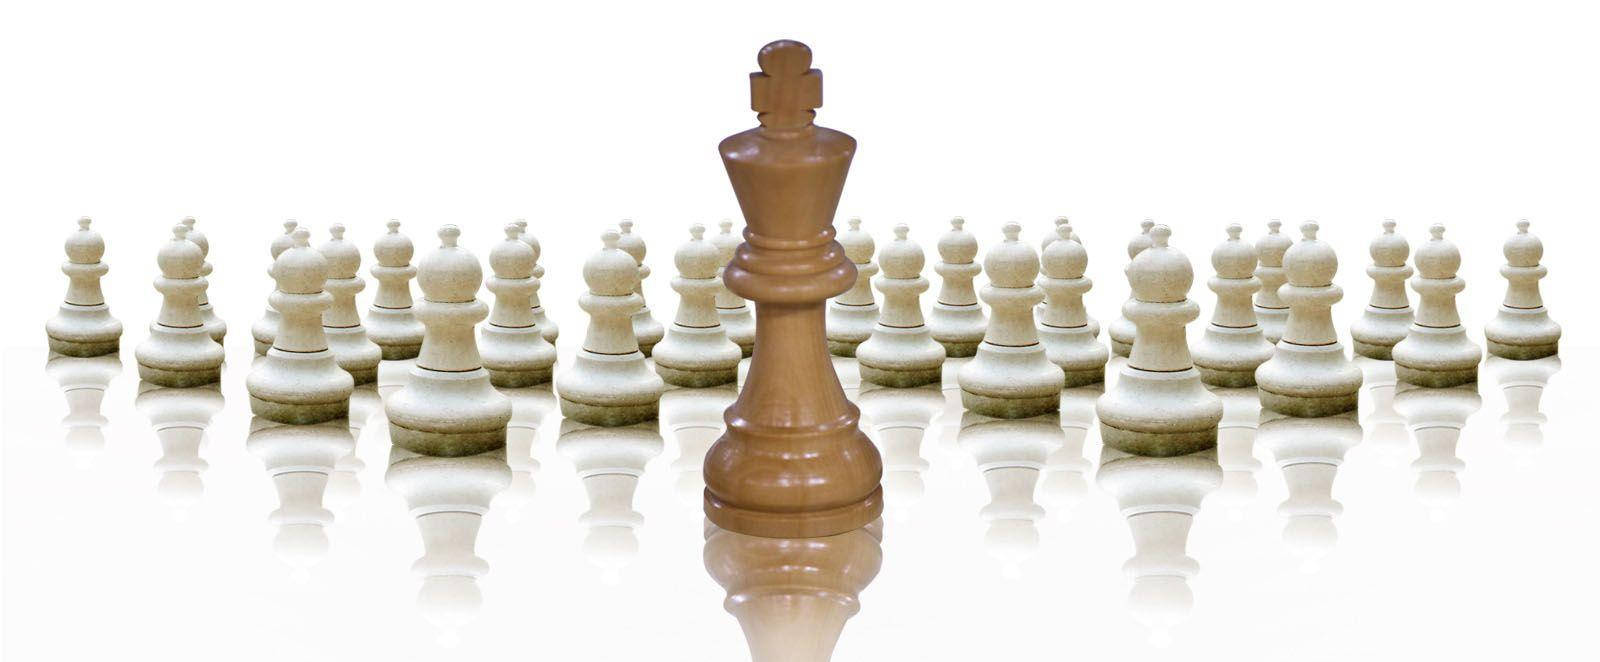 Lead Chess Piece With Pawns Wallpaper